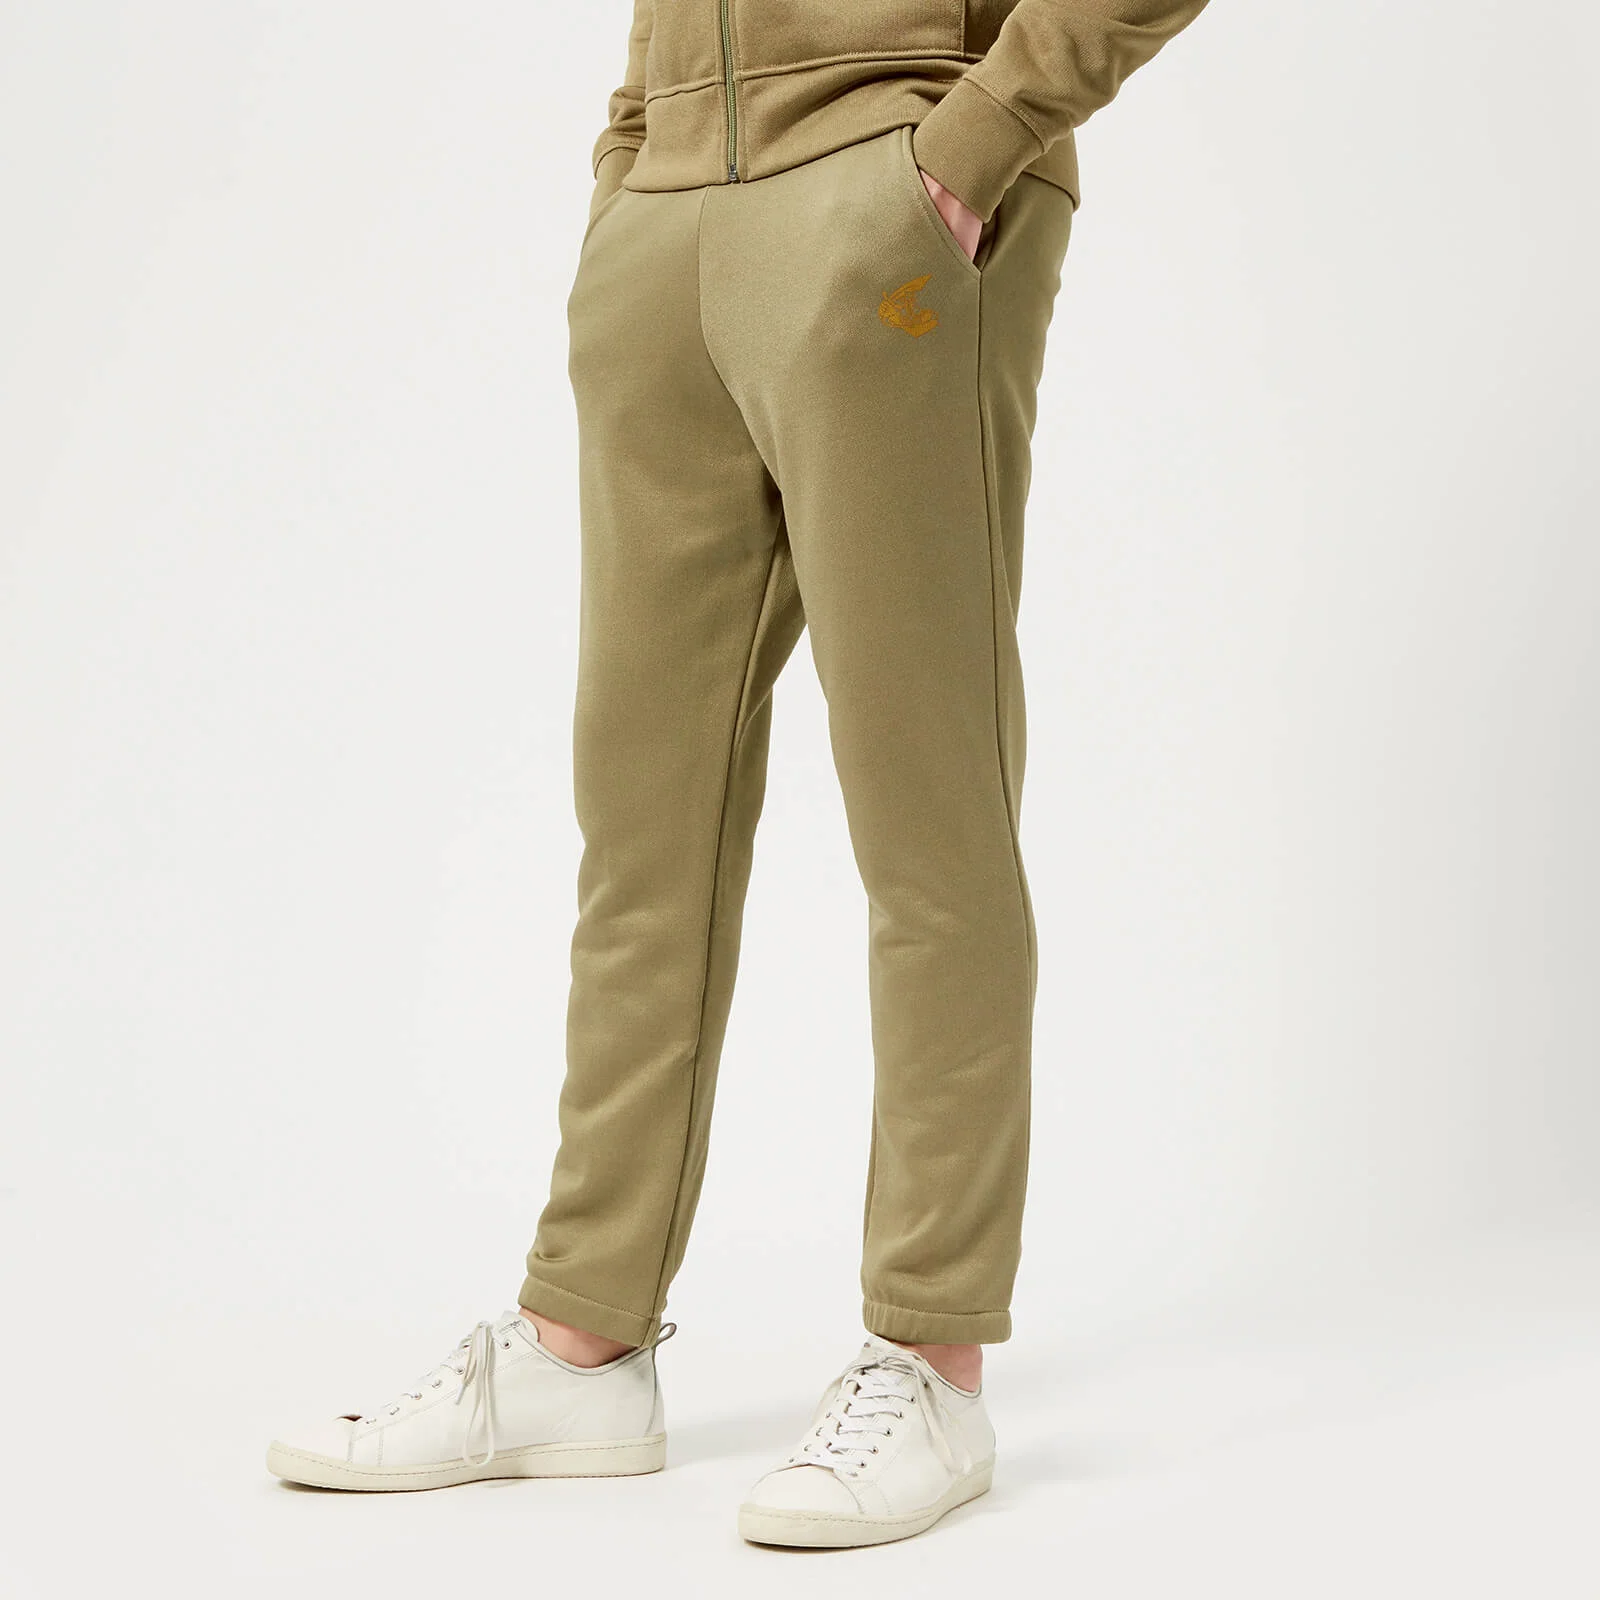 Vivienne Westwood Anglomania Men's Classic Tracksuit Bottoms - Olive Image 1